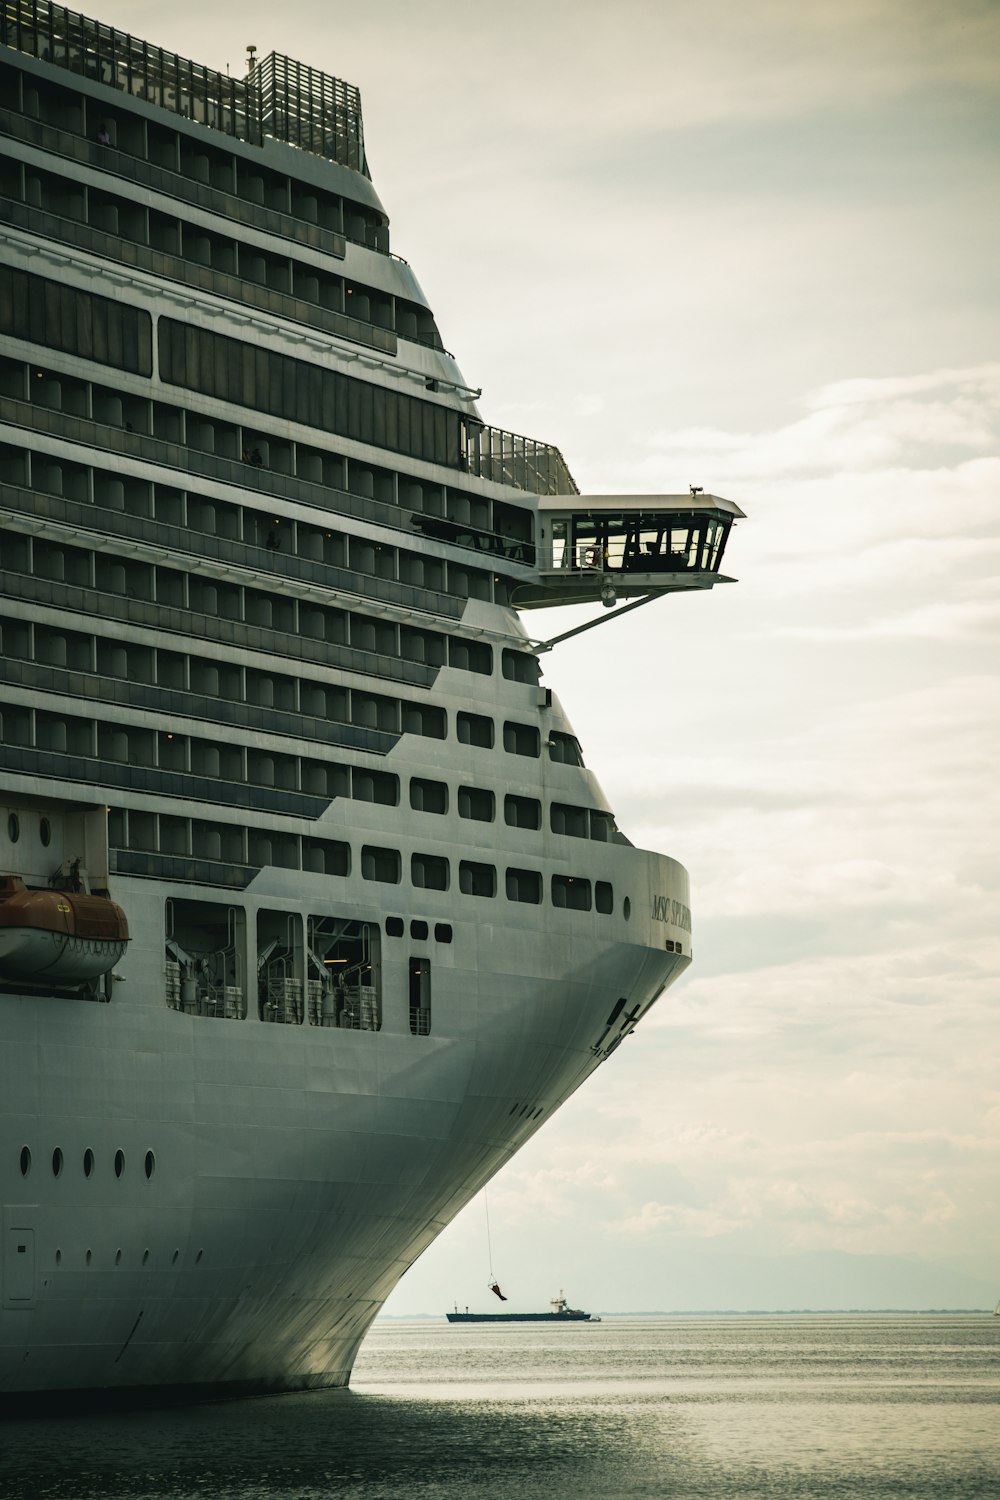 a large cruise ship in the ocean with a small boat in the distance